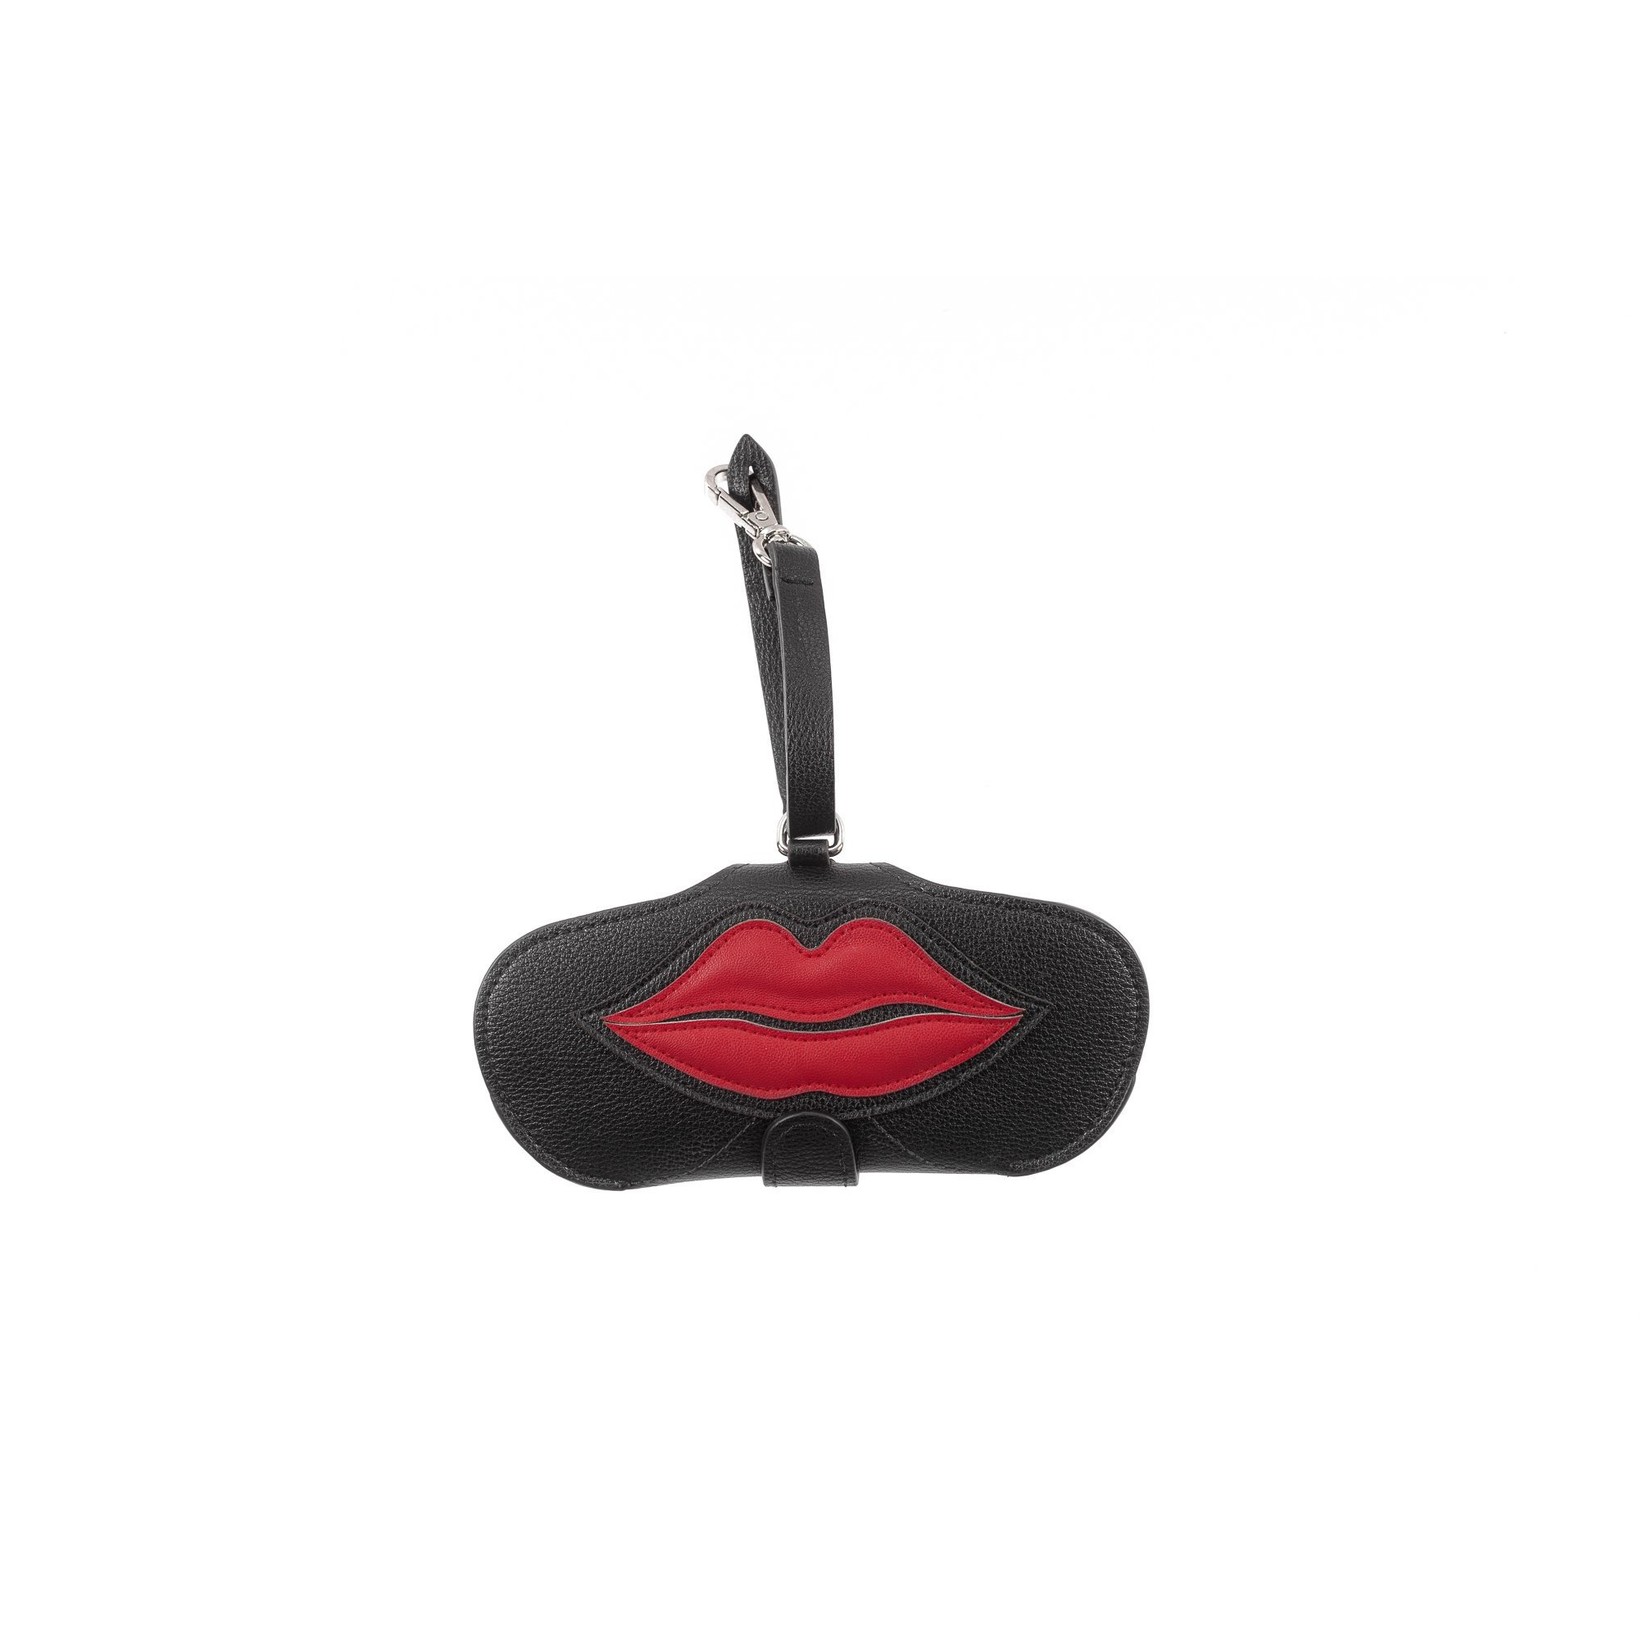 Etui - Pouch - Black with red lips